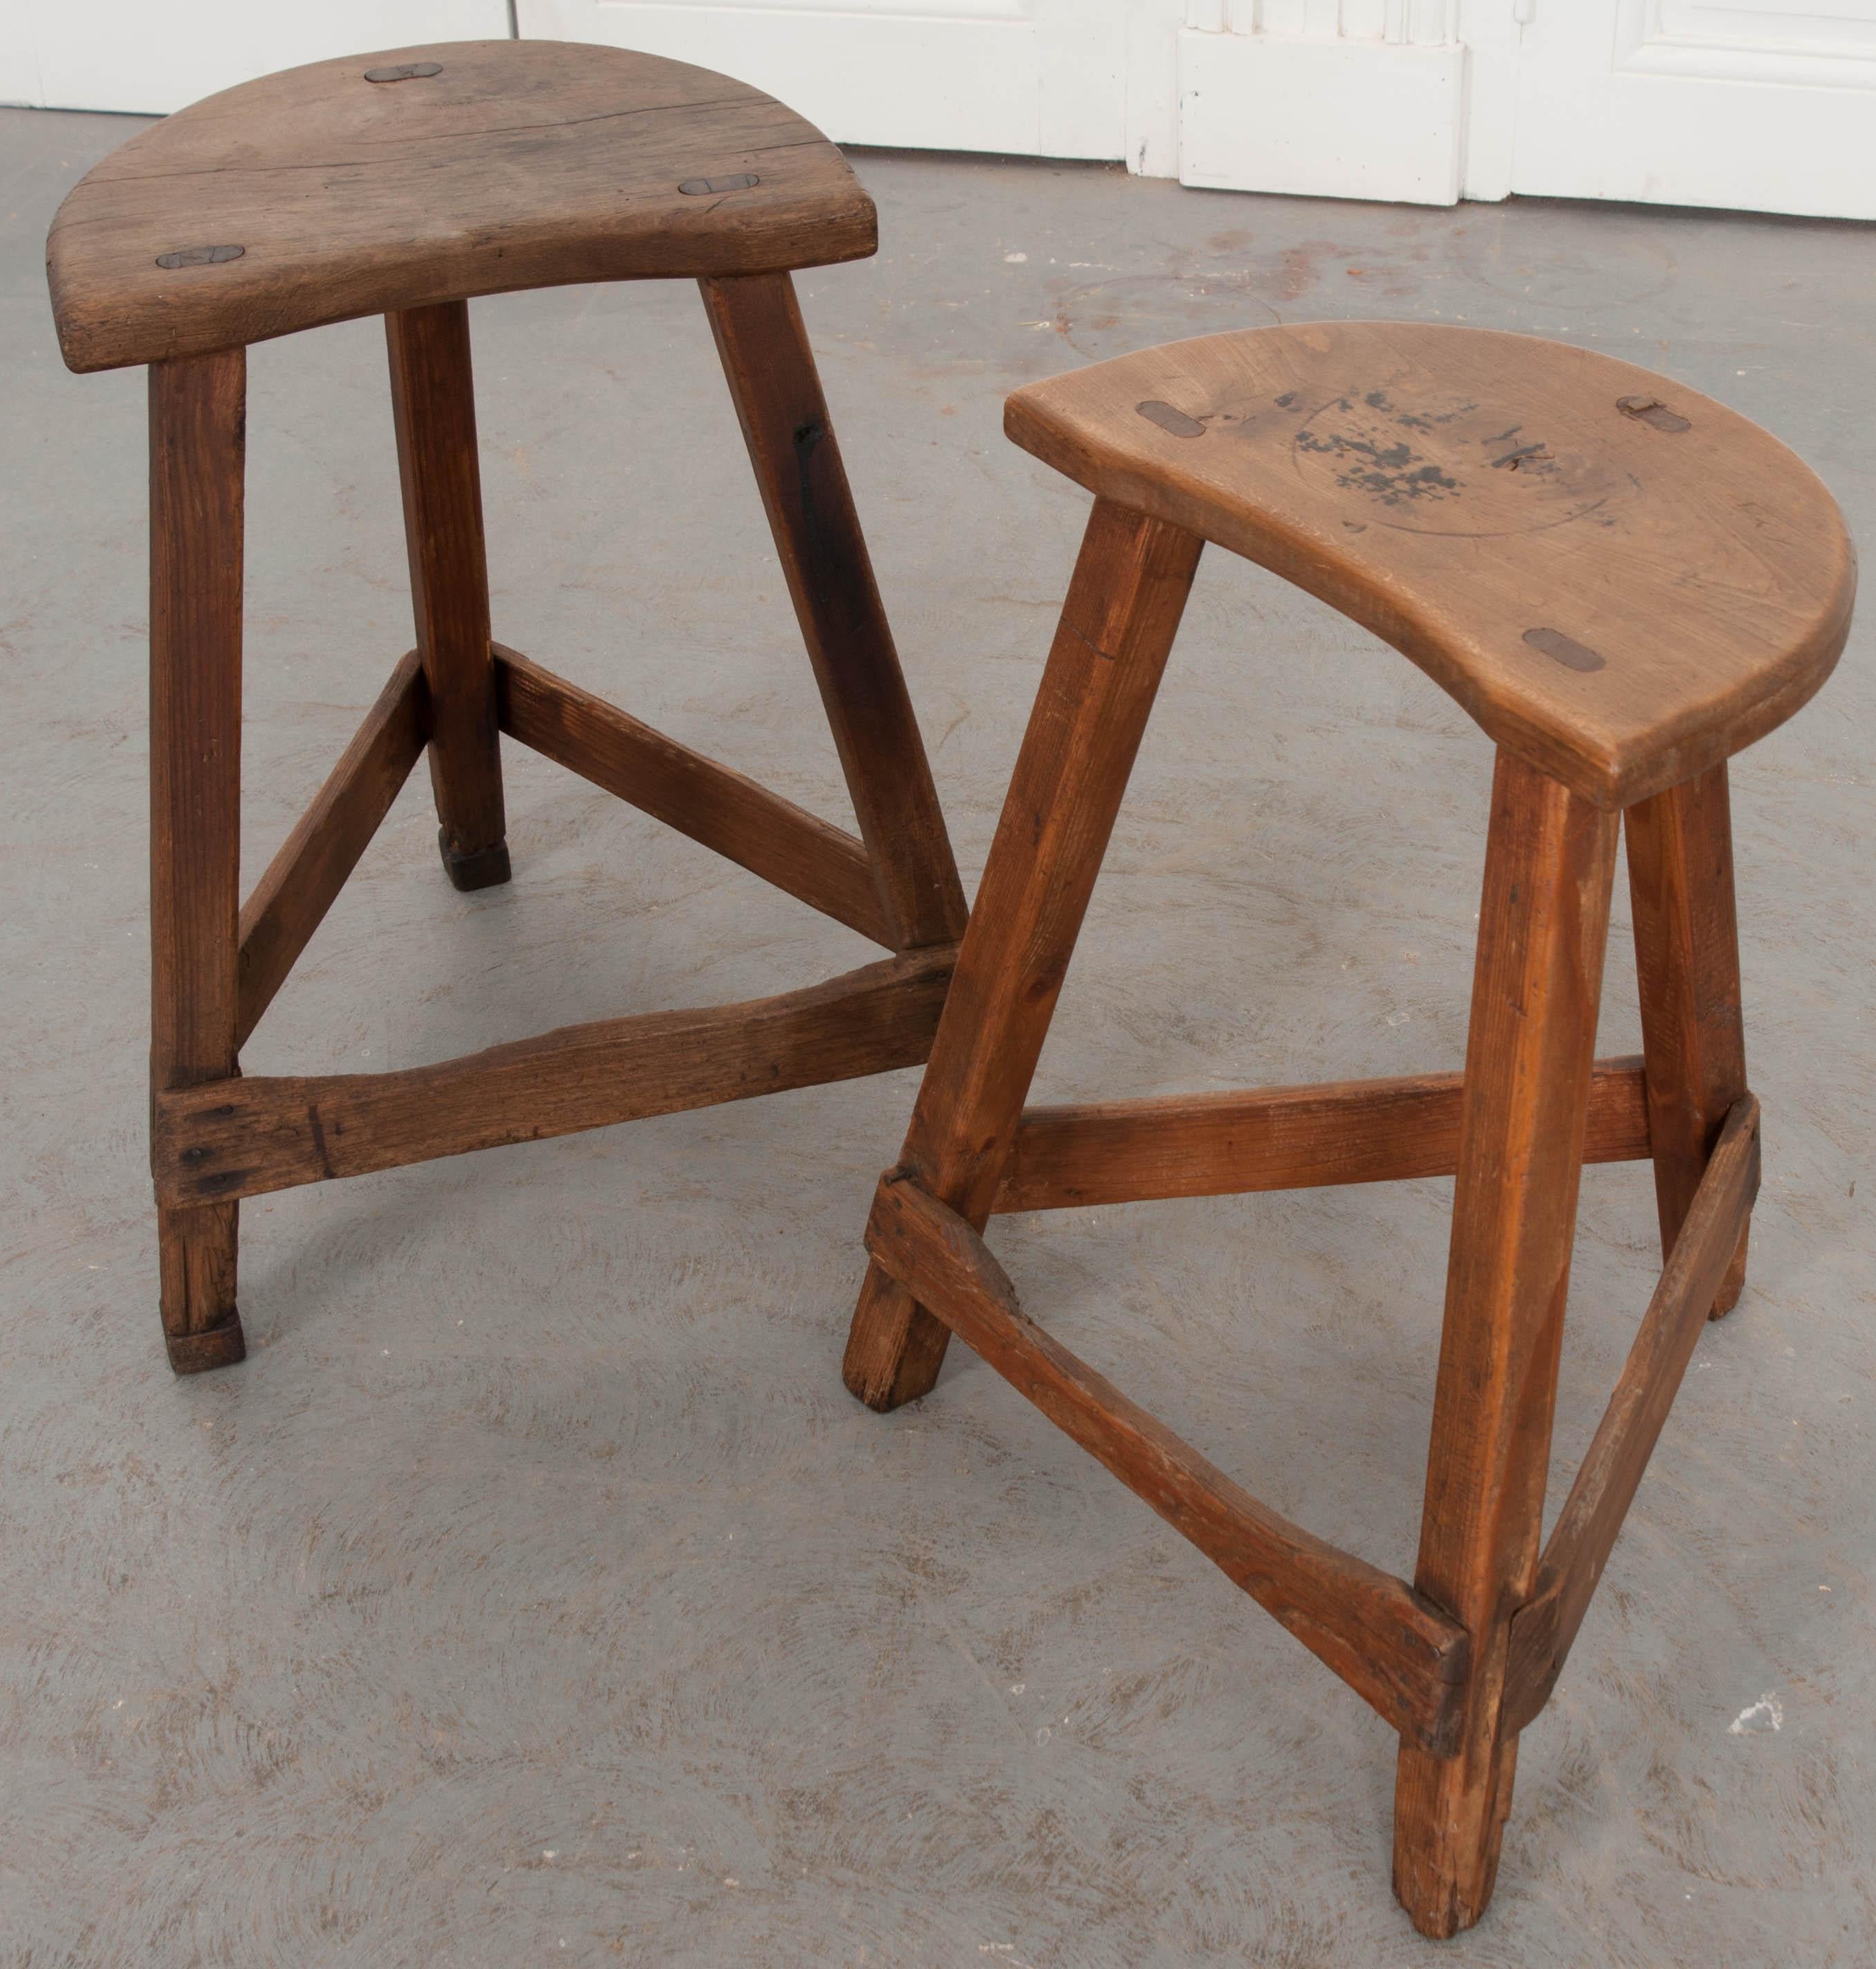 A charming pair of 19th century English low farm stools, made with elm seats and pine bases. Each stool has semicircular shaped elm seats that are supported by tripodal bases. The bases are made of pine, with their front braces markedly worn from